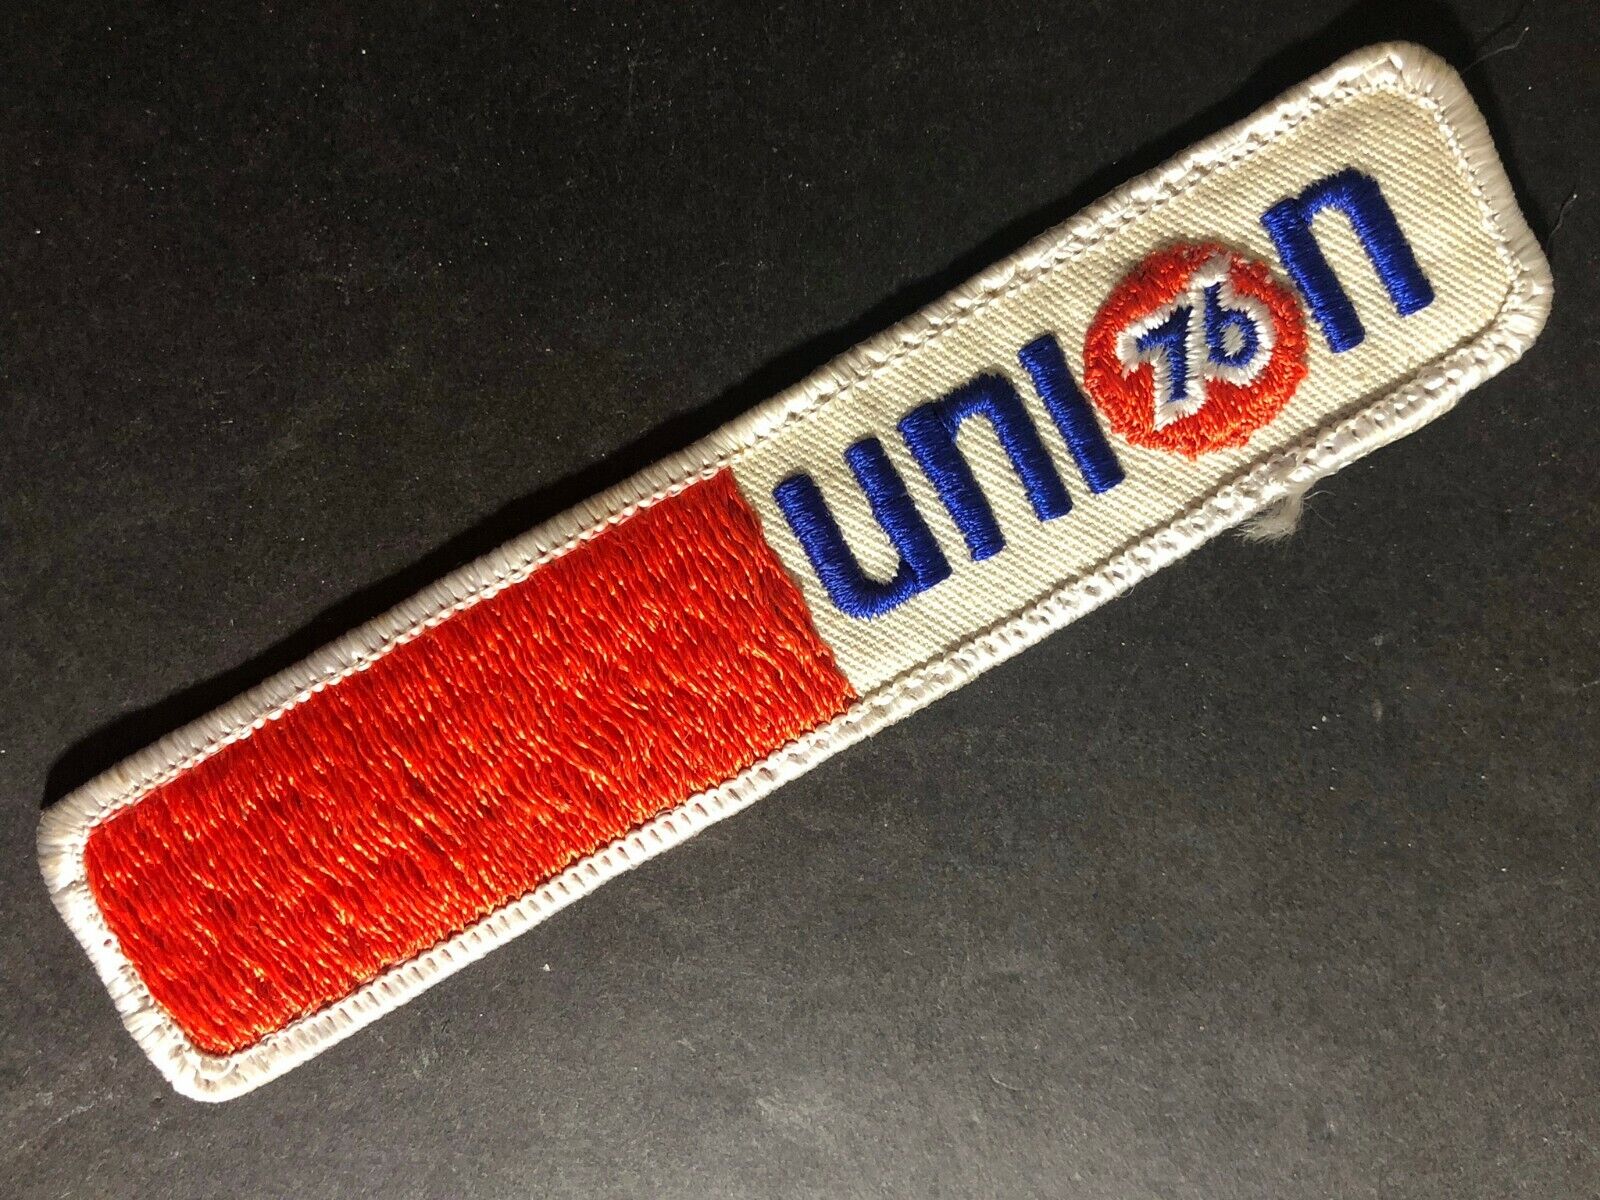 Vintage Embroidered Patch c1970's-80's Union 76